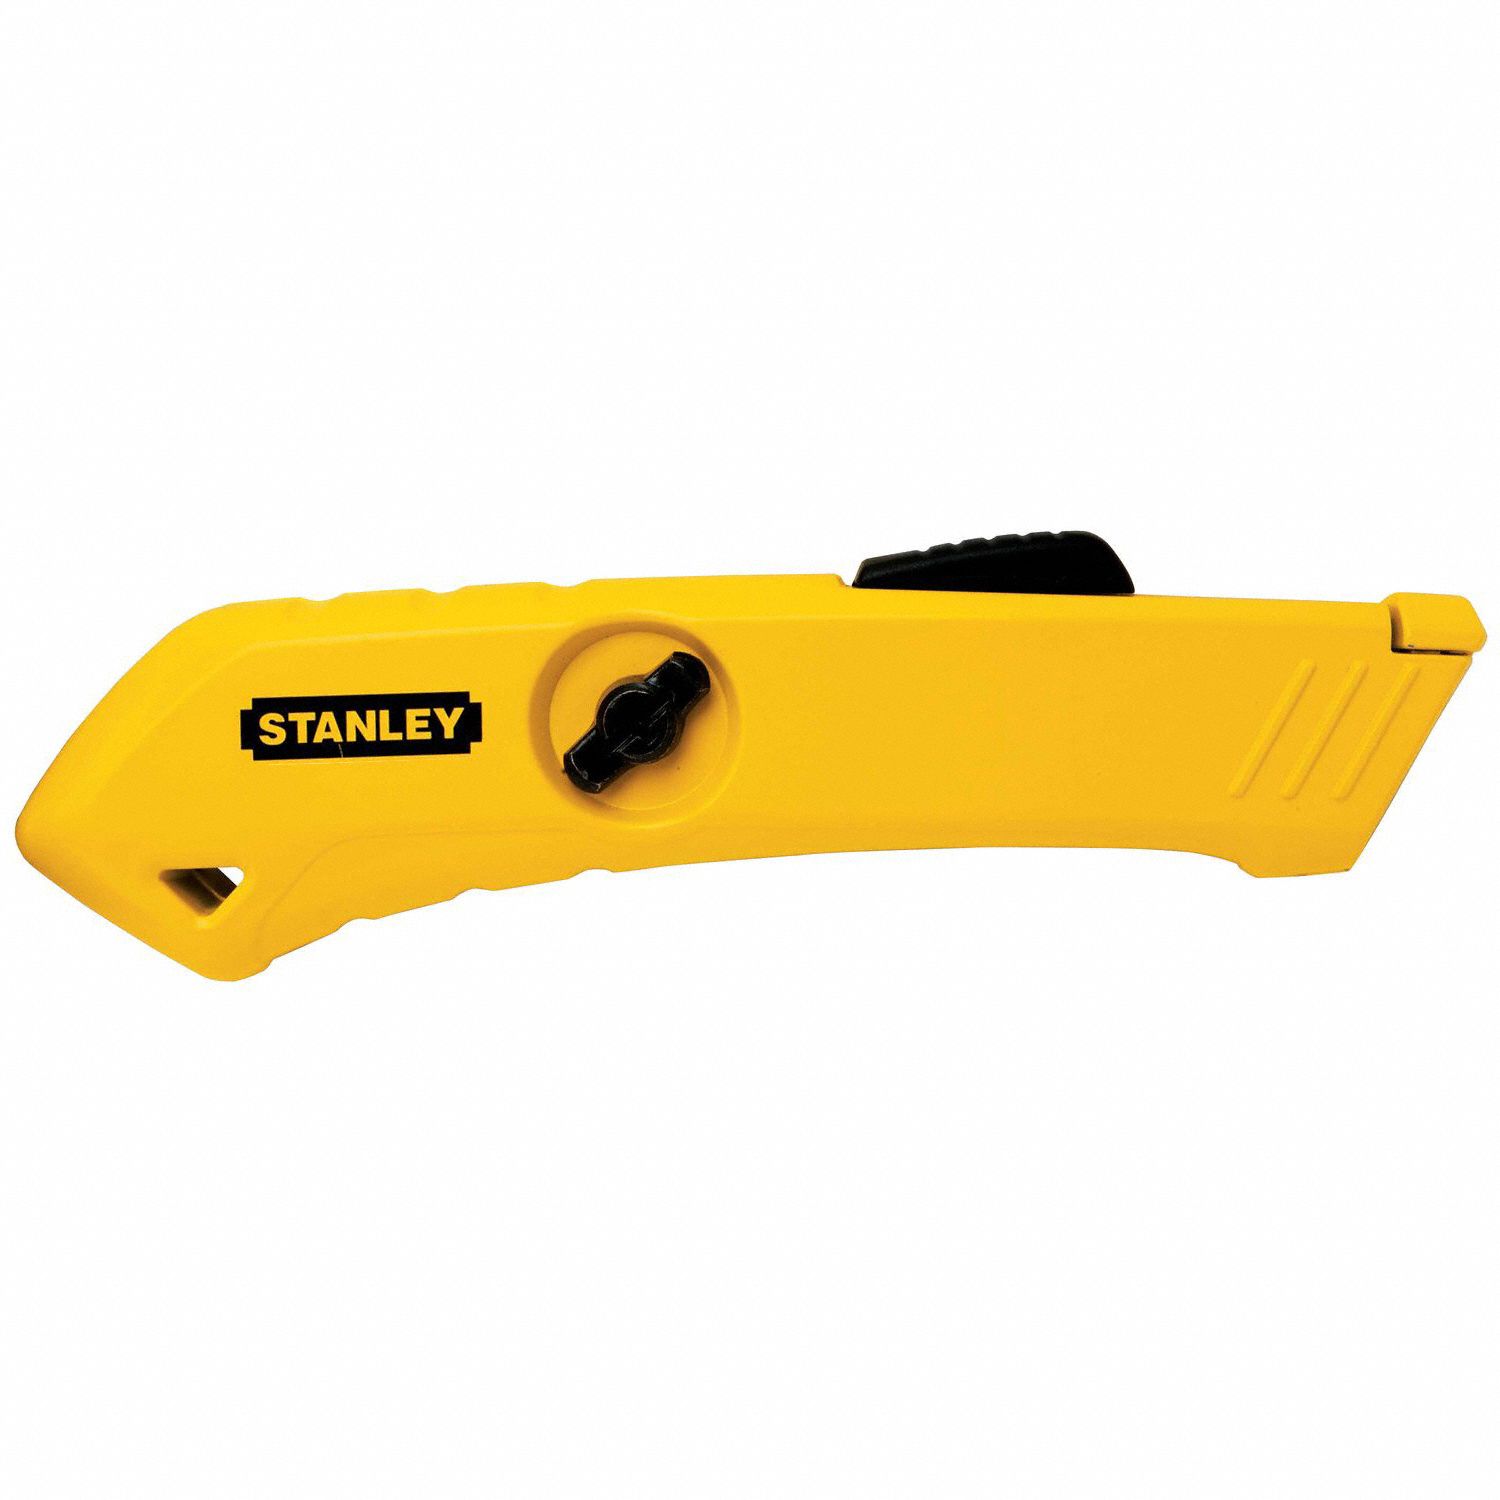 Concealed Safety Knife from STANLEY, 2018-12-05